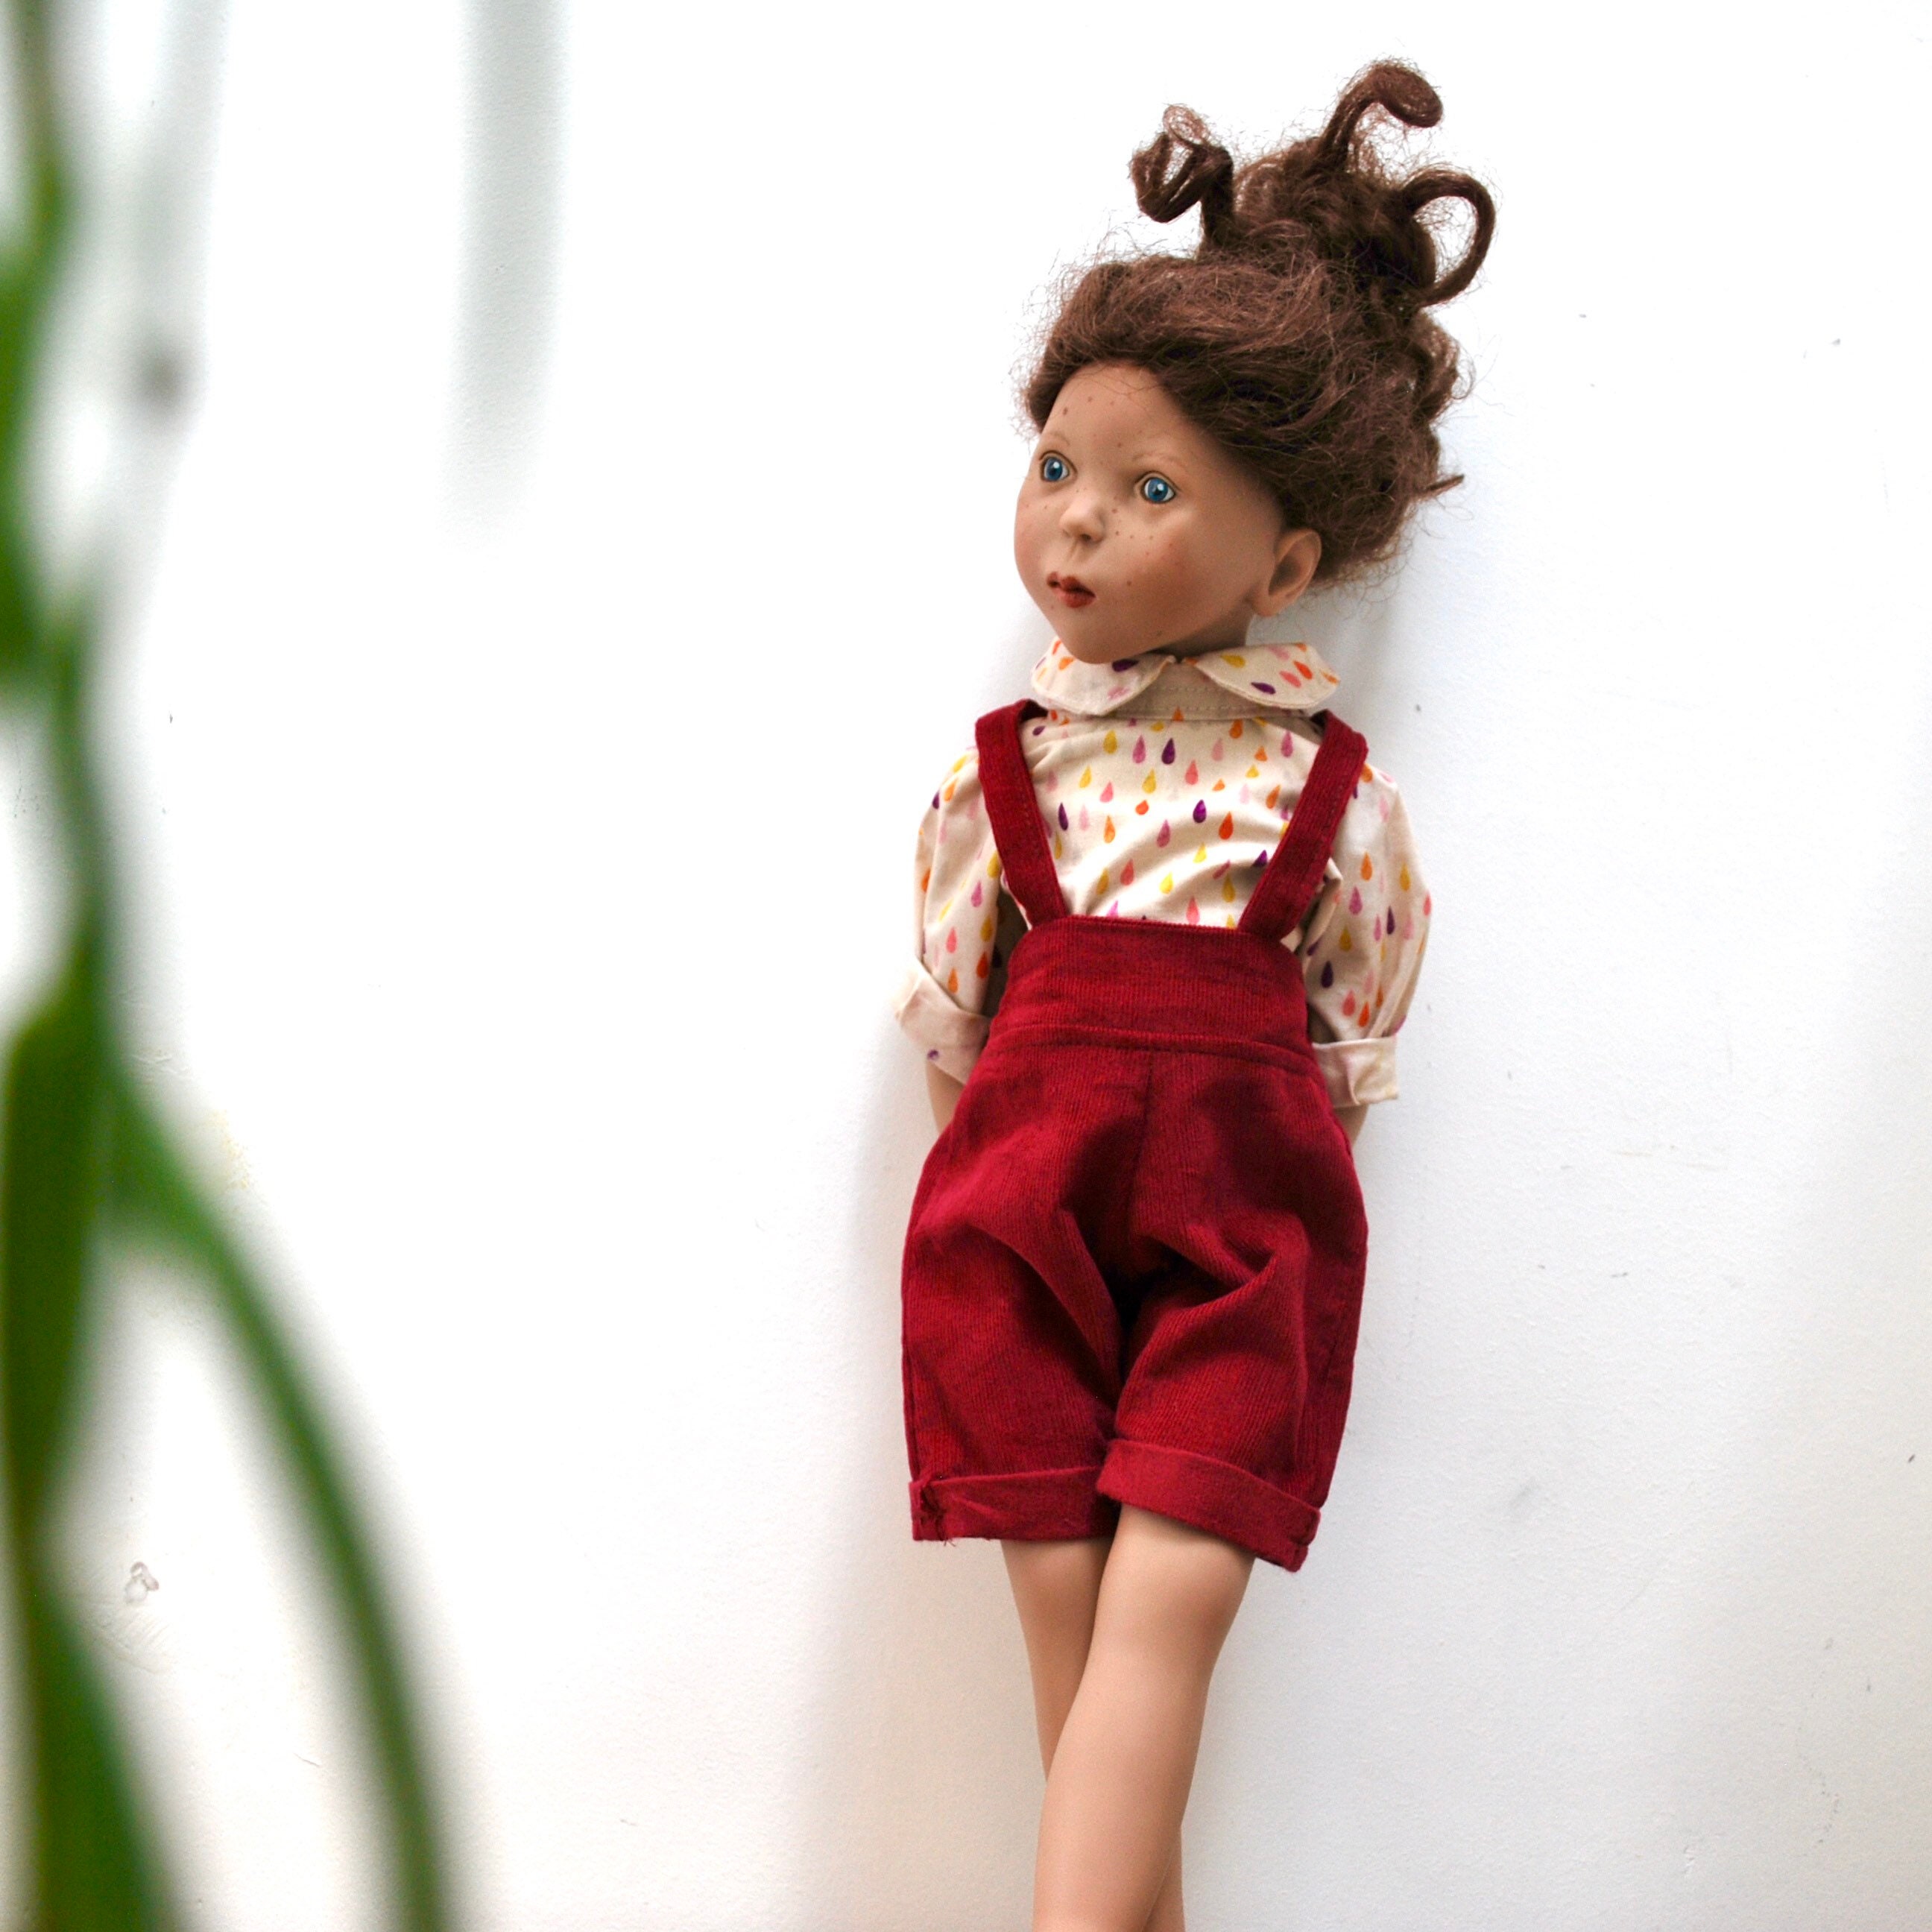 16-18 Inch Height Dolls Dungarees Dolls Dungarees 16-18 Inch. 